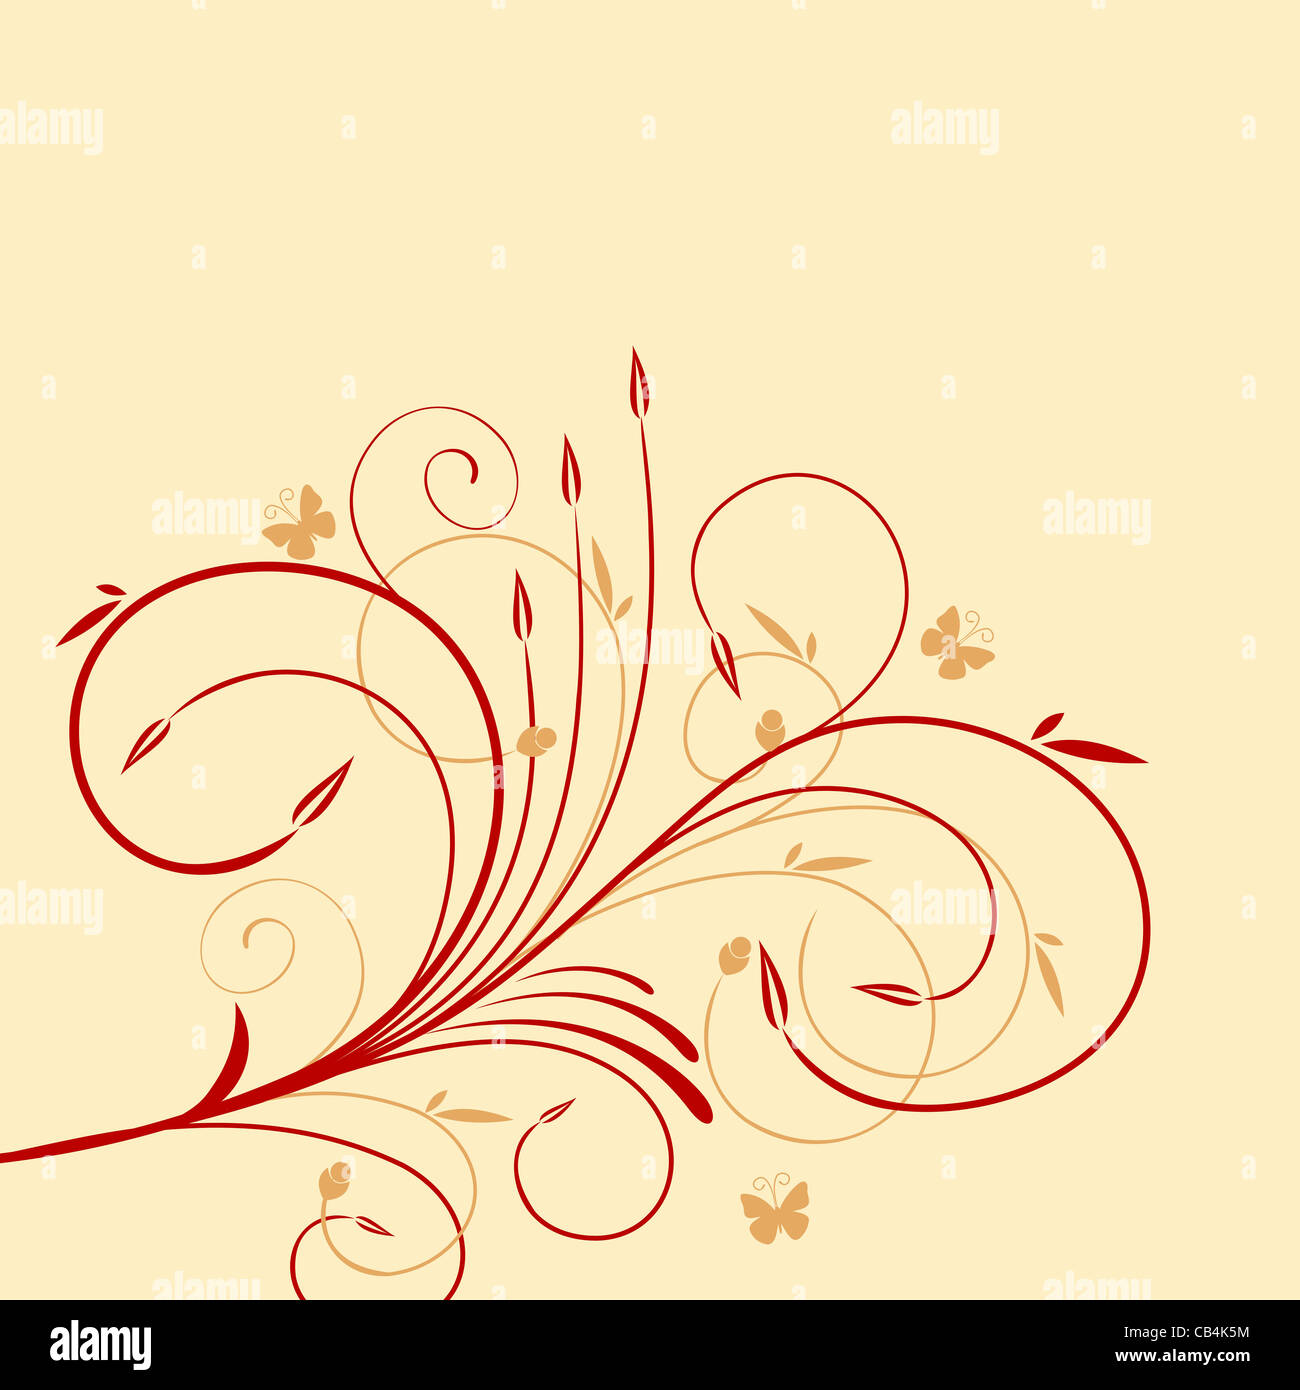 Cute floral elements for design - vector Stock Photo